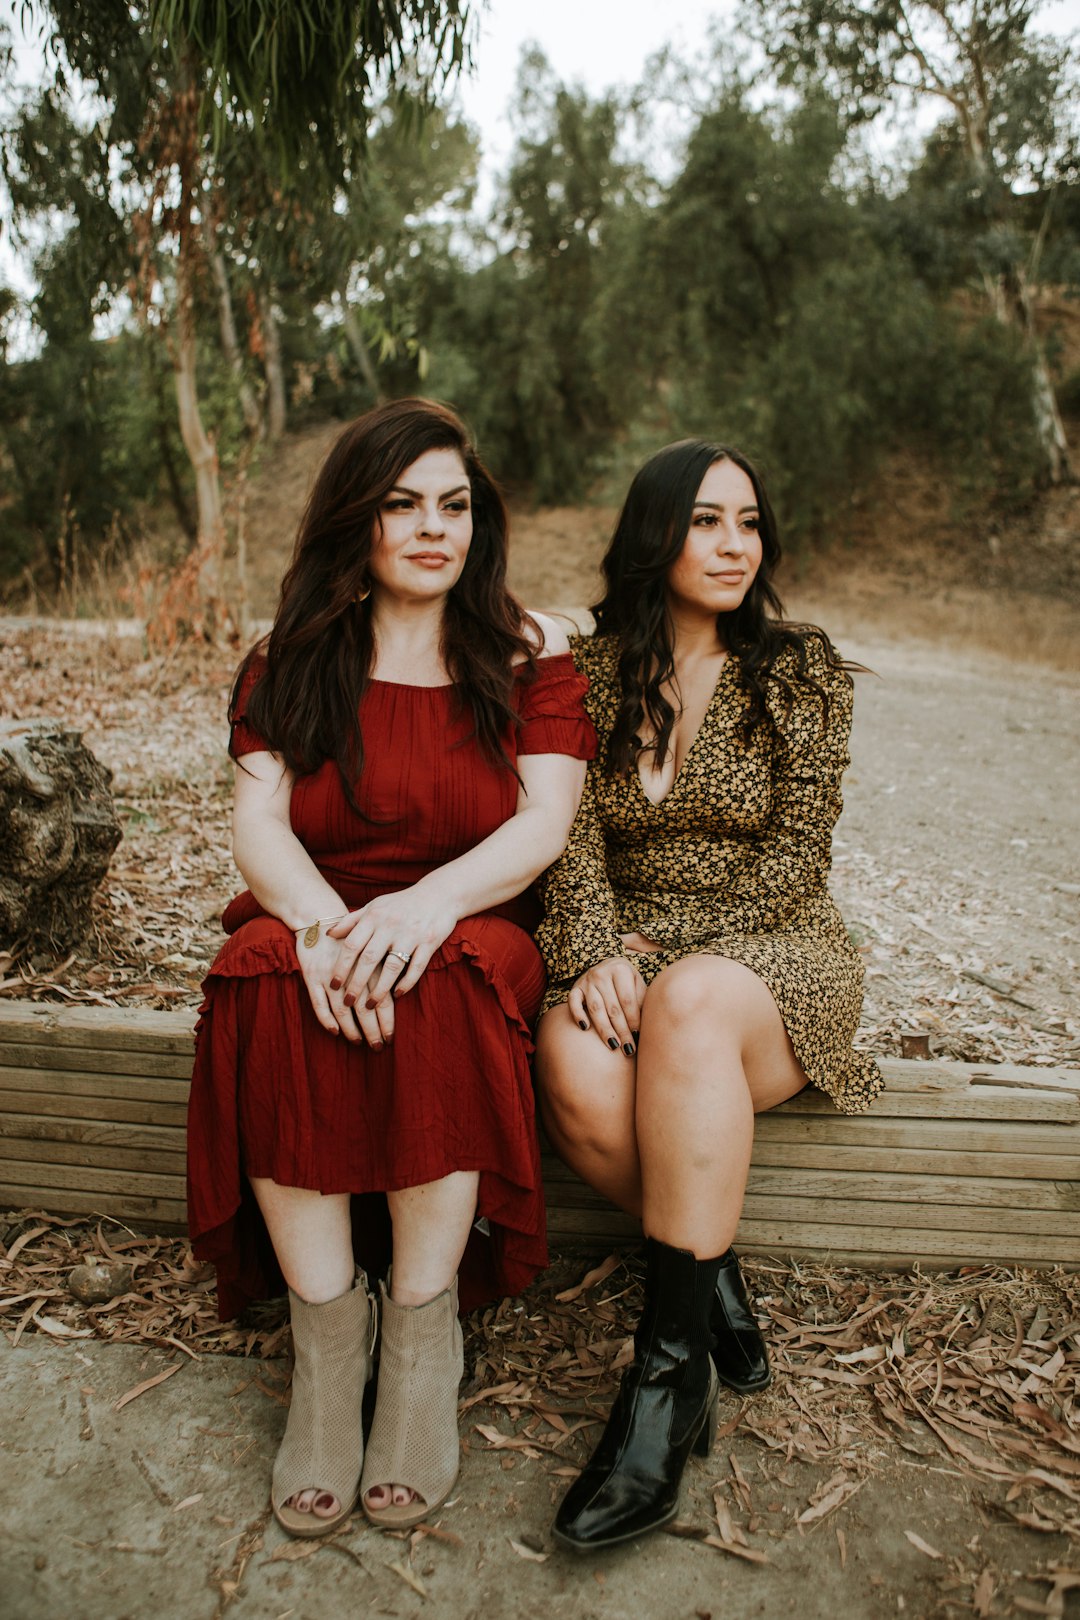 2 women in red dress sitting on brown wooden bench